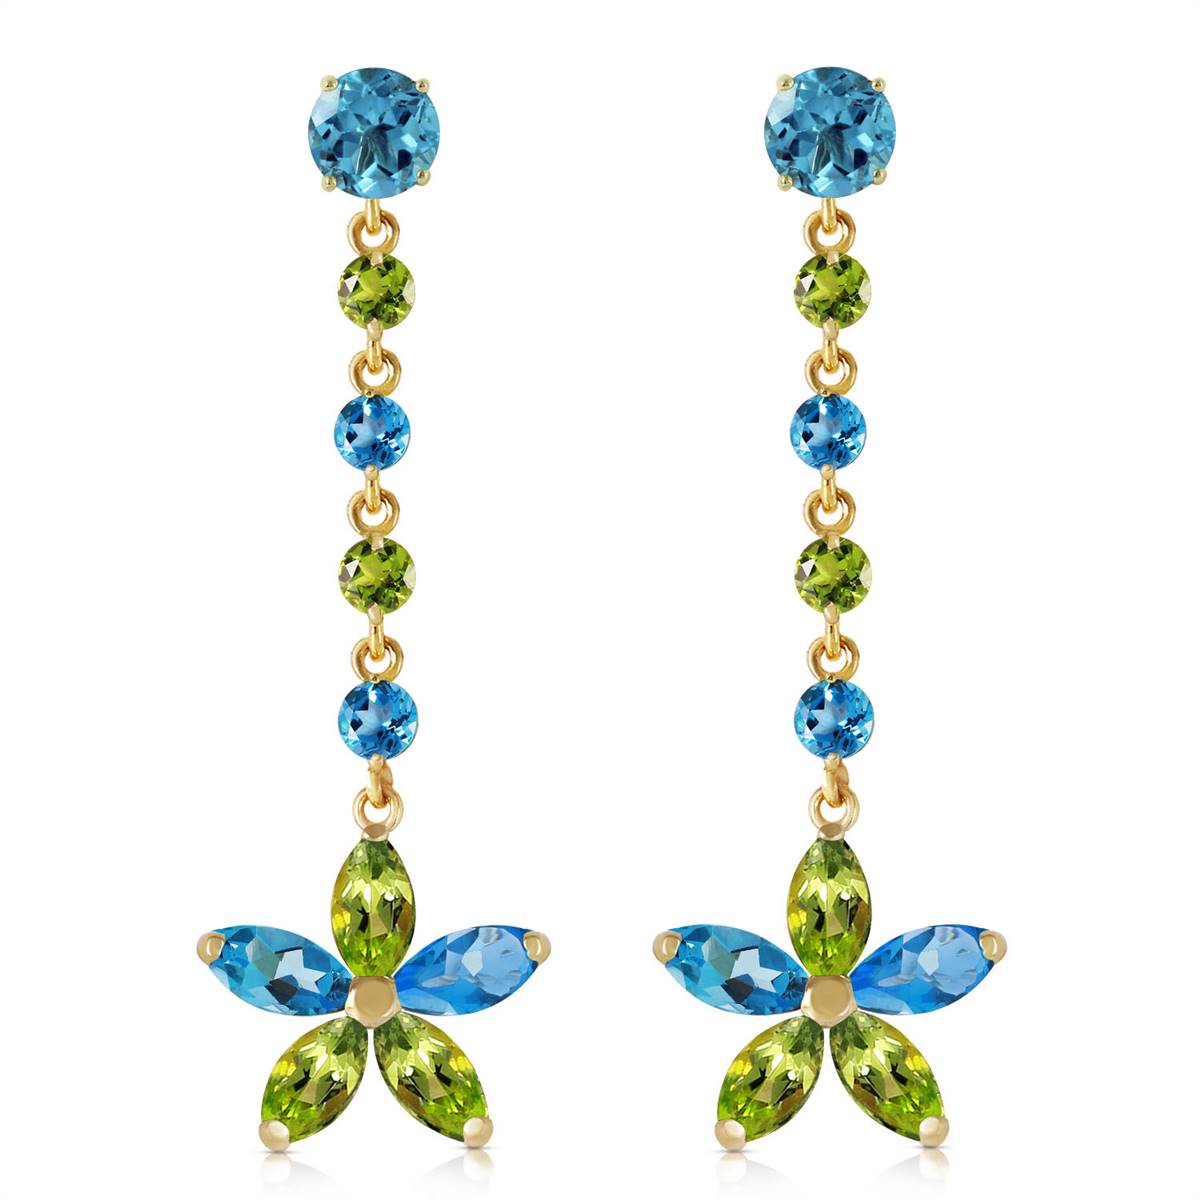 4.8 Carat 14K Solid Yellow Gold Chandelier Earrings Natural Blue Topaz